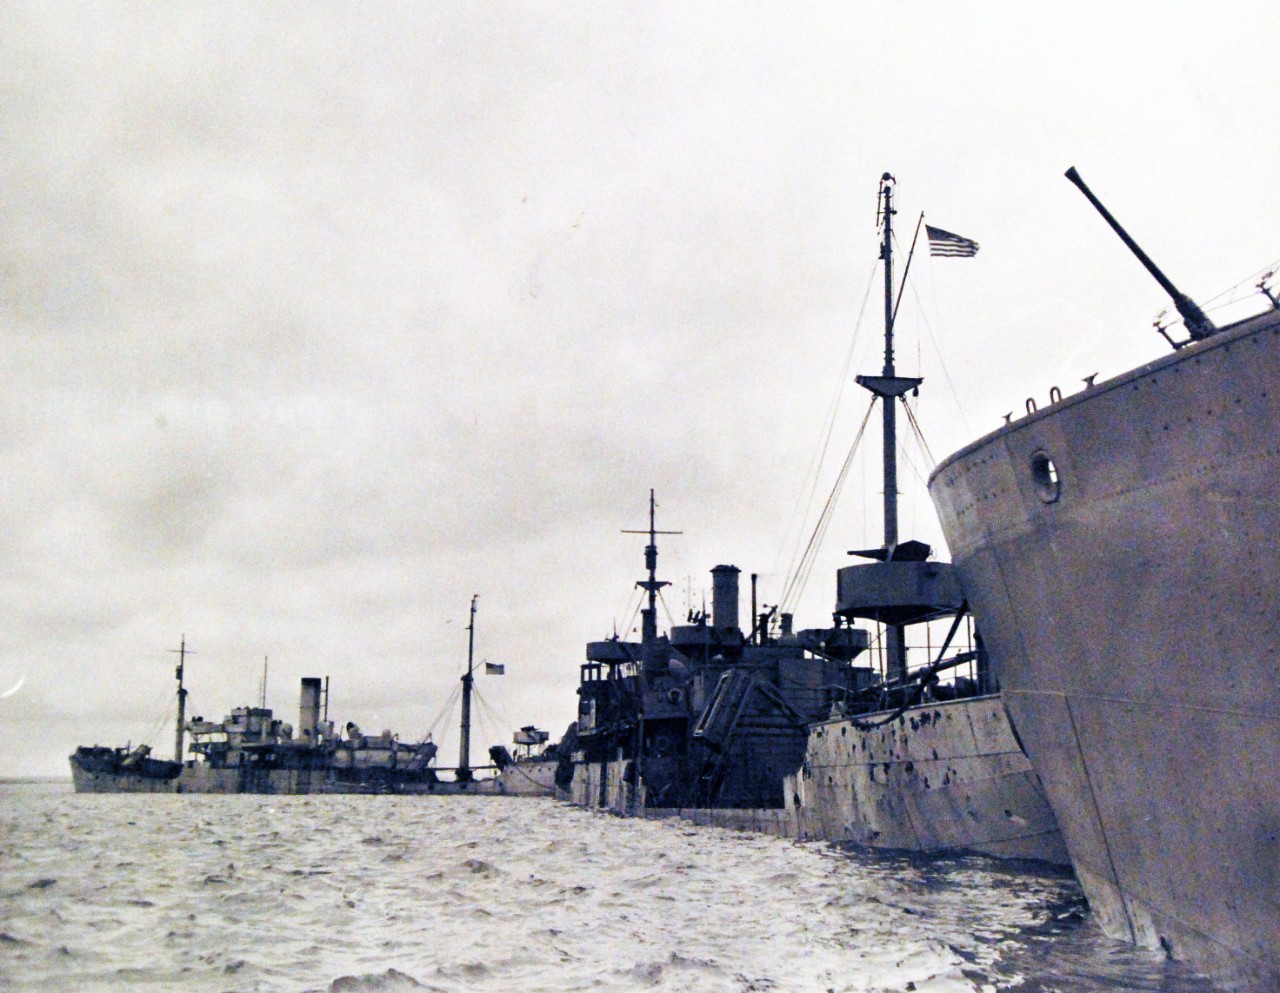 80-G-285129:  Normandy Invasion, Mulberries, June 1944.   A “Gooseberry,” a line of sunken ships forming part of a U.S. Mulberry, a man-made harbor off Omaha Beach, France, protecting landing craft from storms in English Channel.   Photograph released November 7, 1944.  Official U.S. Navy photograph, now in the collections of the National Archives.  (2016/03/15).